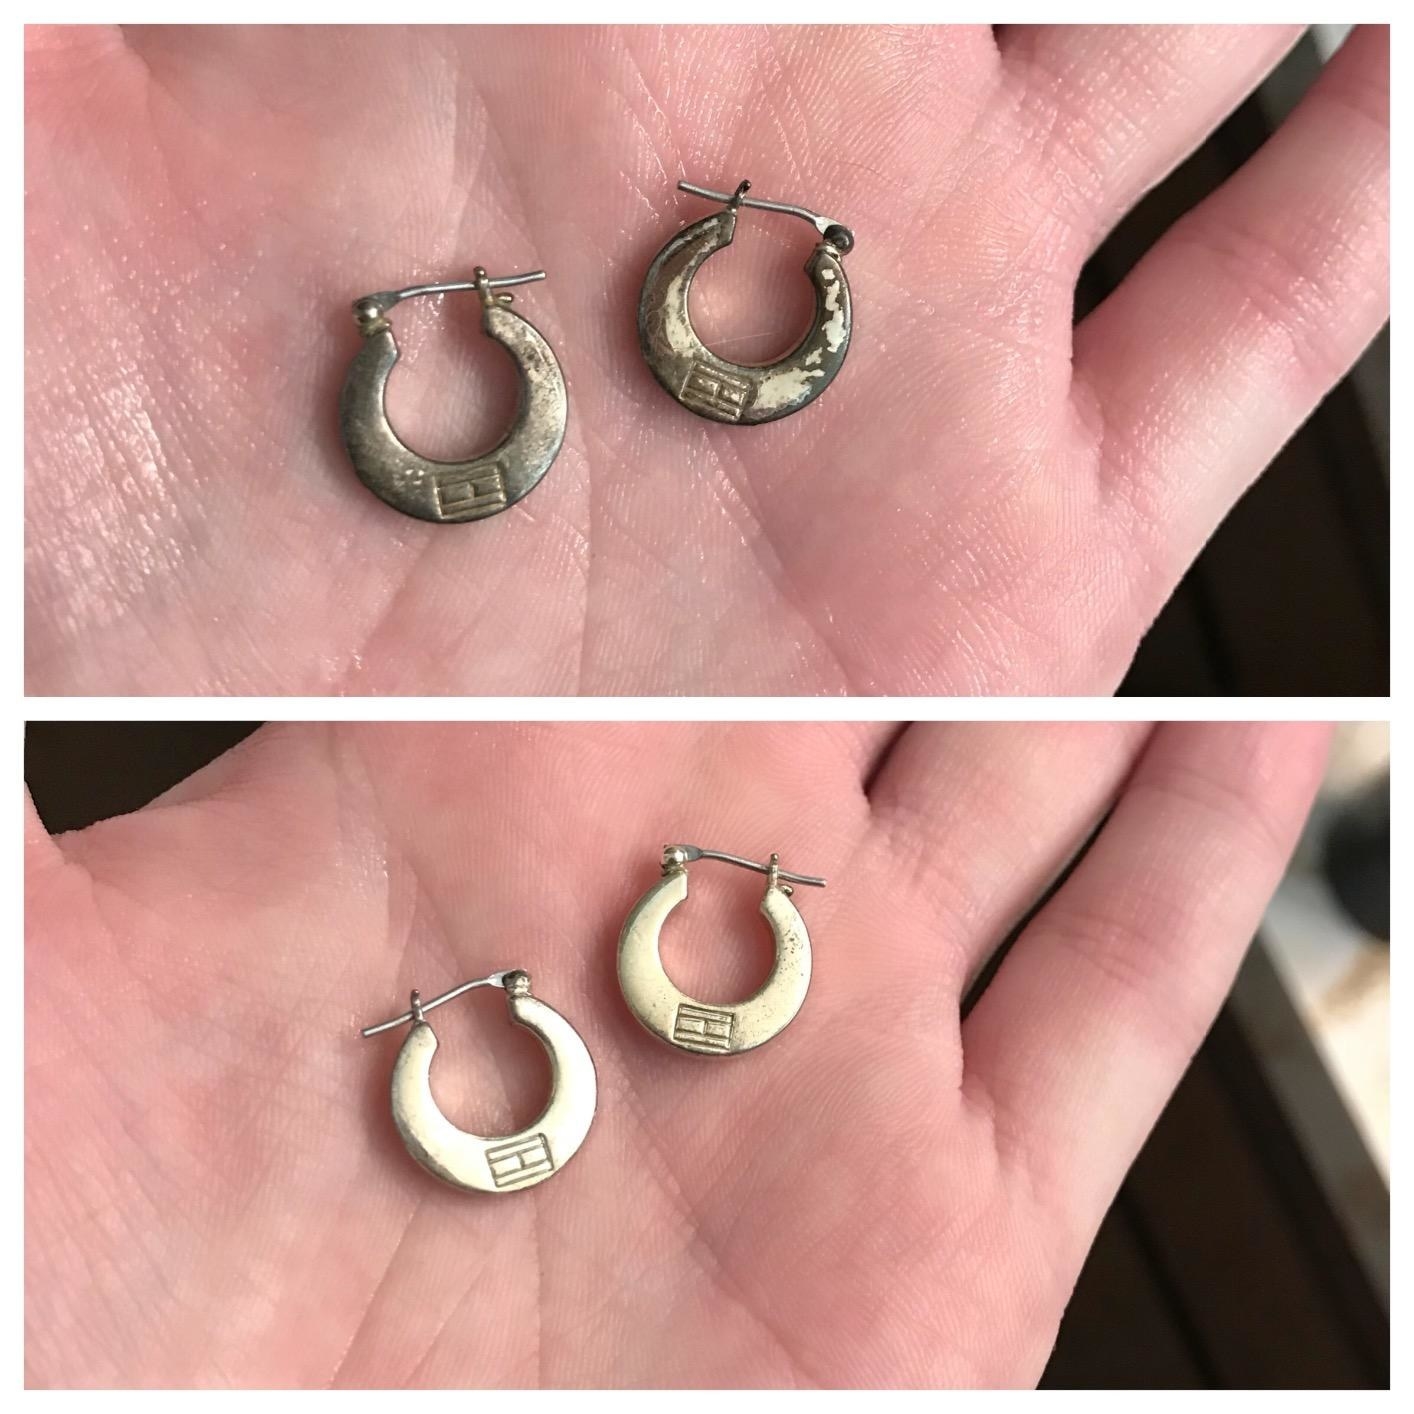 Reviewer image of before and after shot of tarnished gold earrings and cleaned up gold earrings